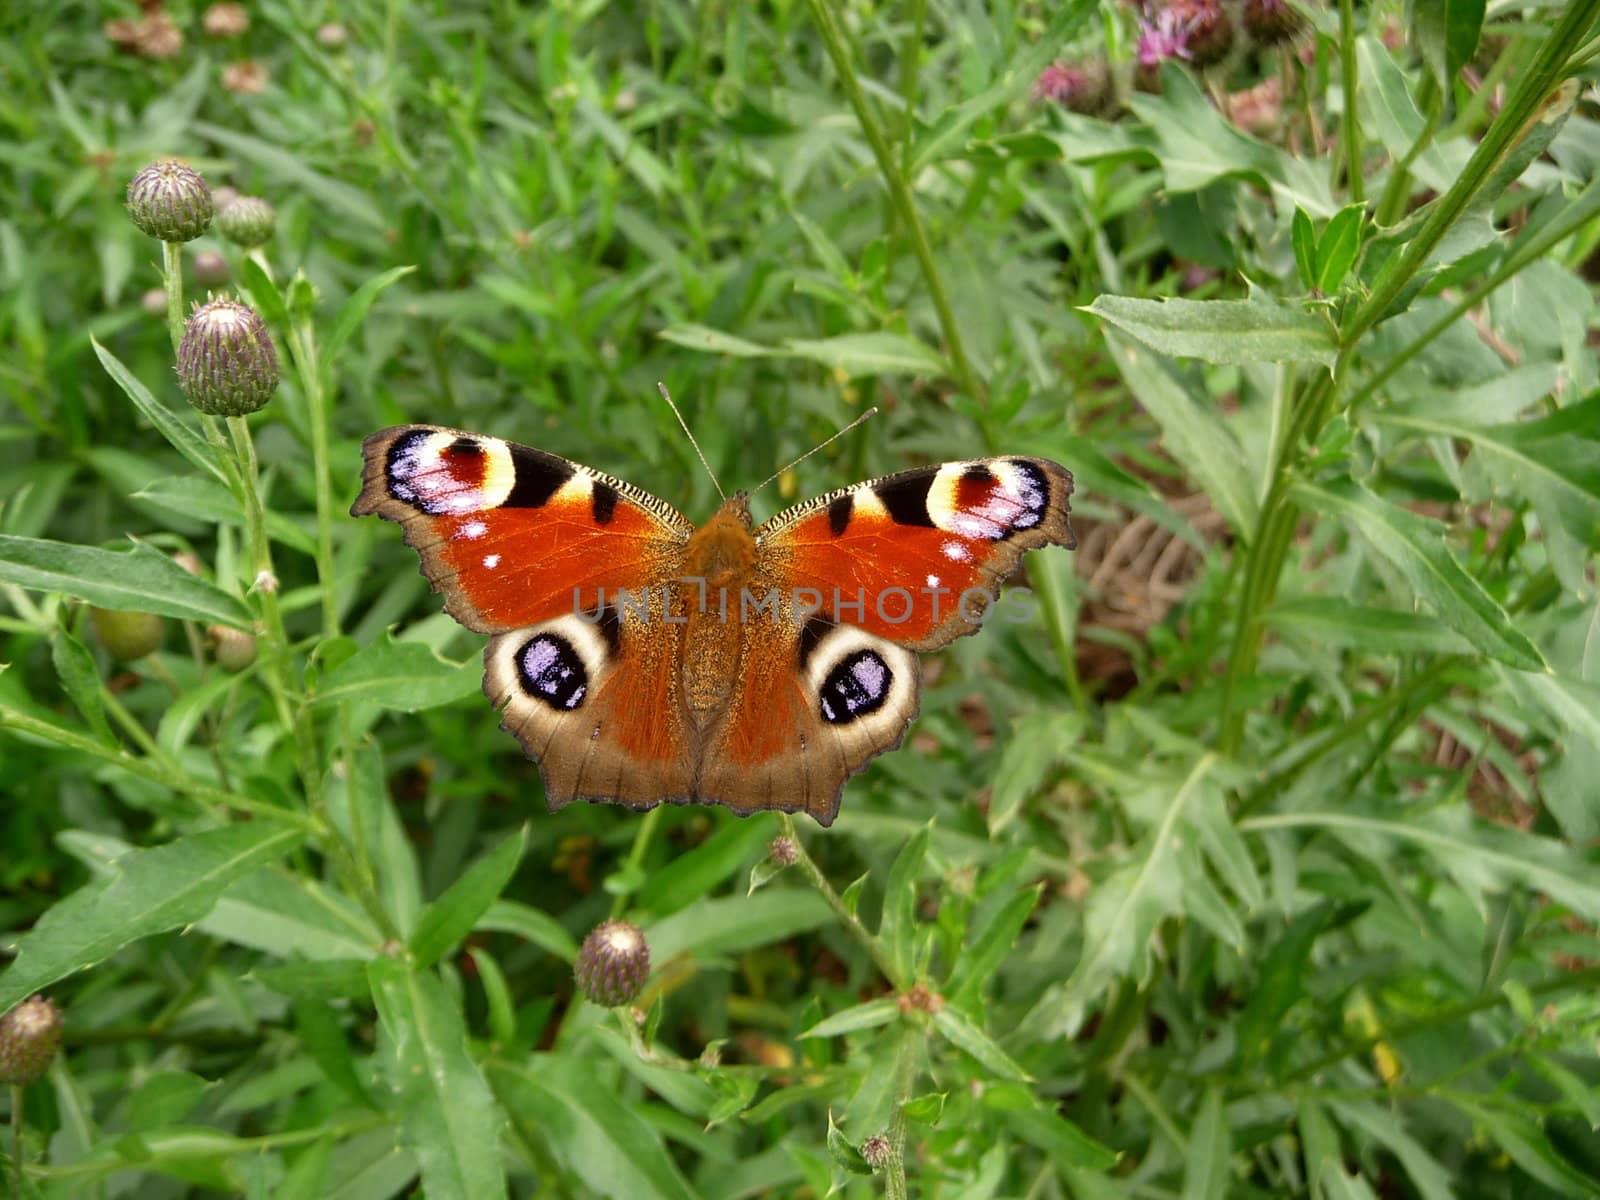 Peacock butterfly on grass by tomatto